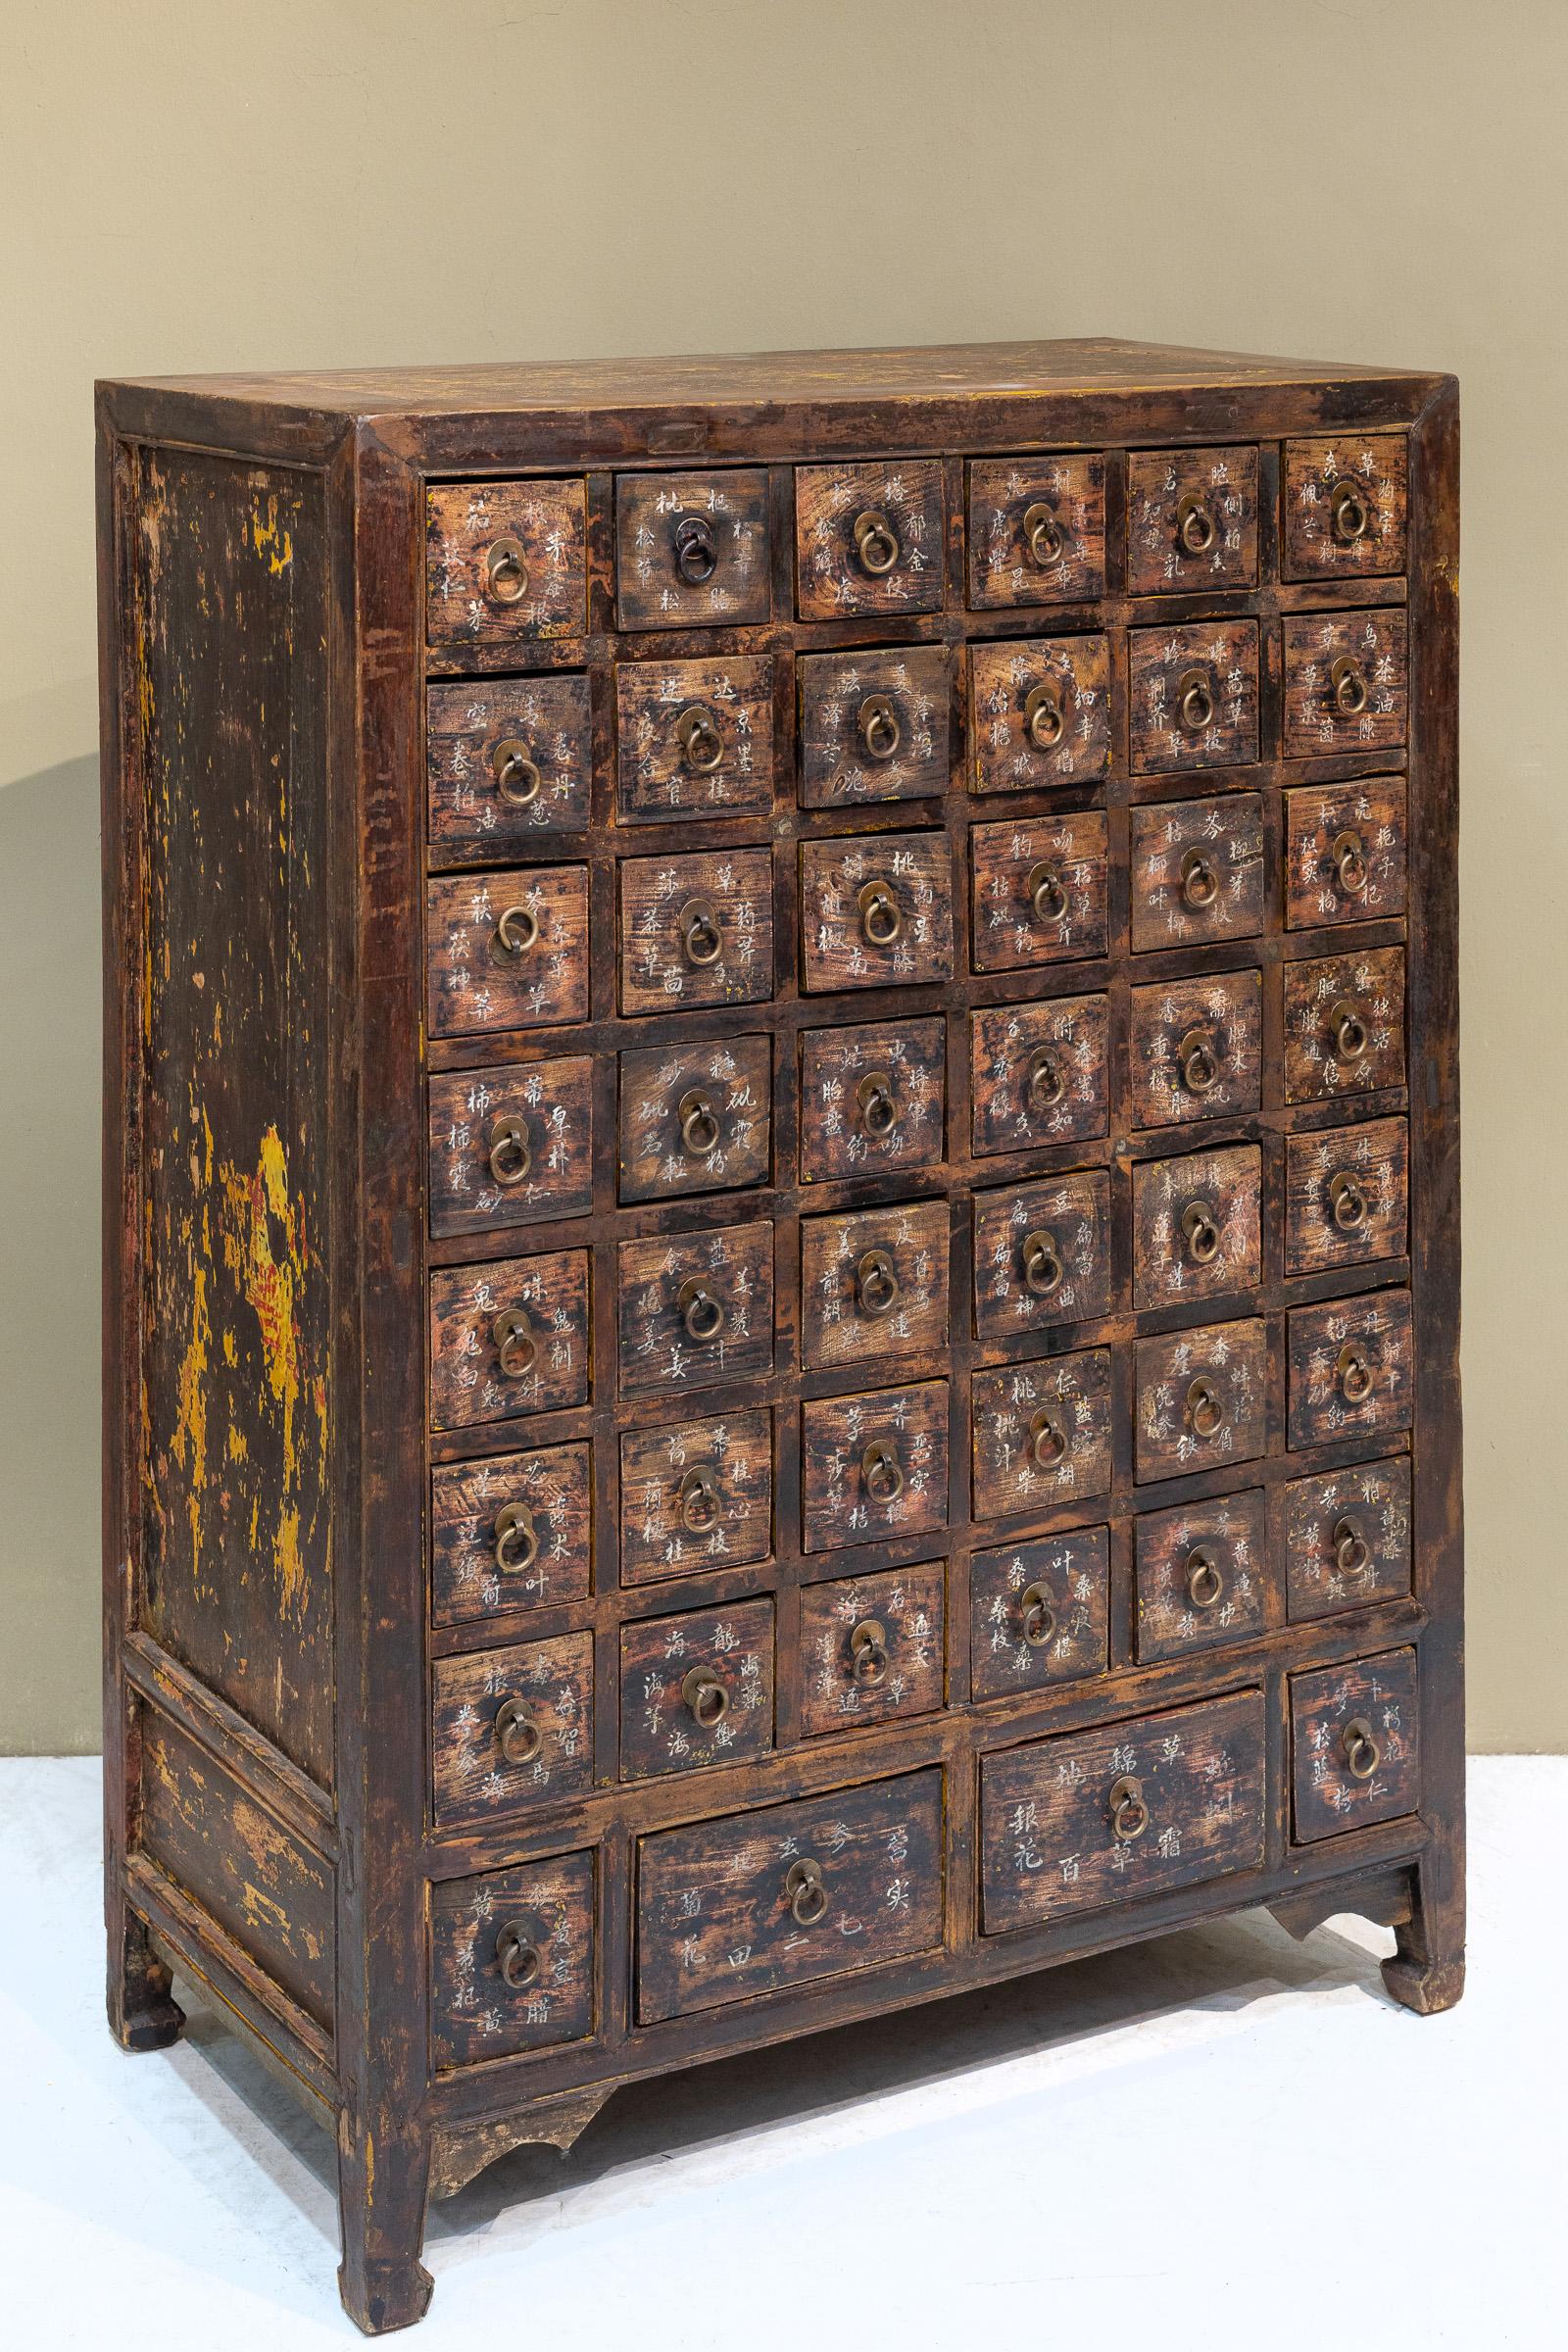 A late 19th century apothecary cabinet from Shanxi province, China, that was used to store and organise Chinese herbs. At some point, yellow paint was applied over the top and sides of the cabinet, and even some red words were written on the sides,